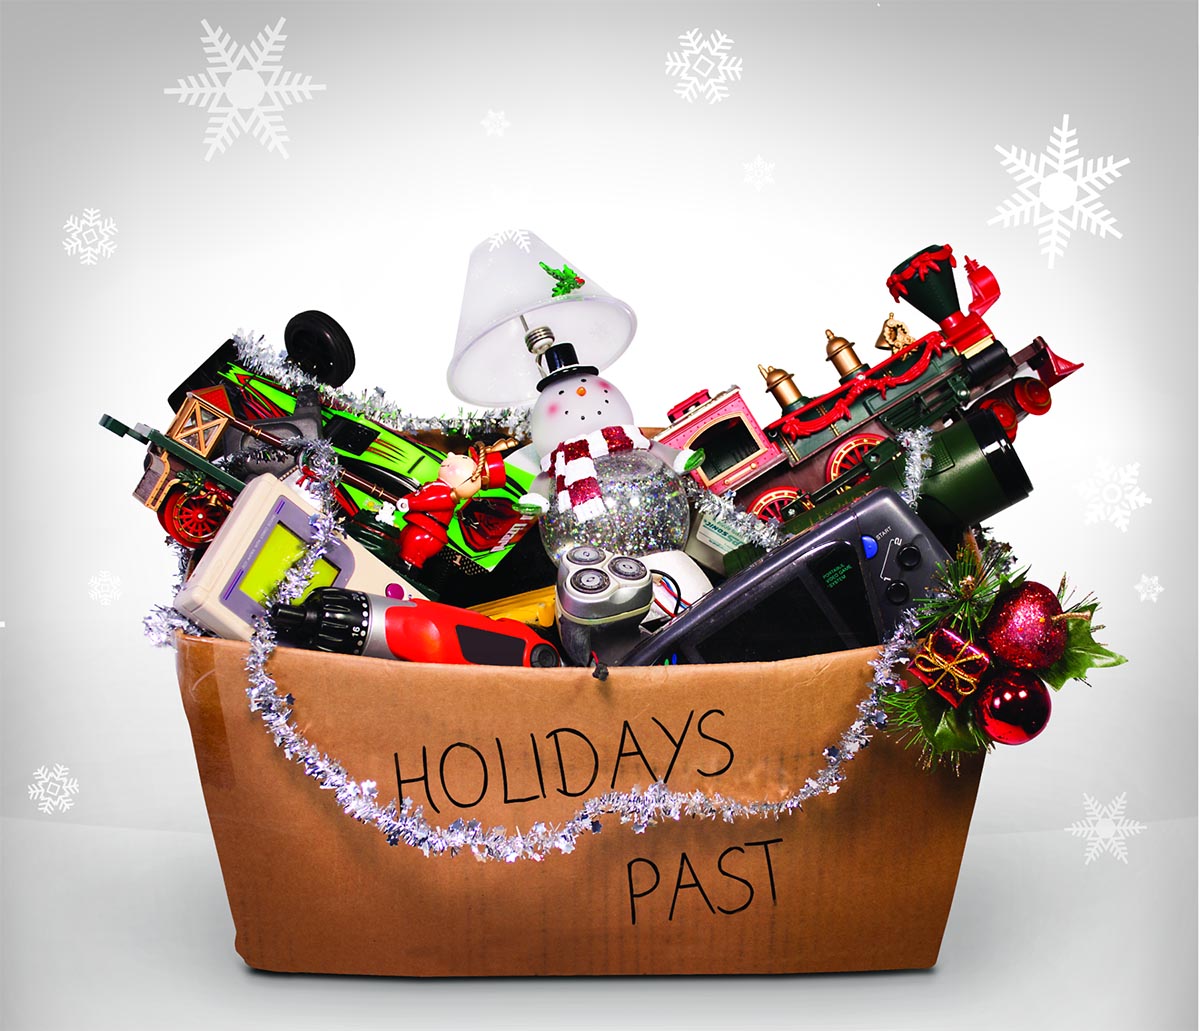 Holiday season safety: Protect your family by recycling old batteries